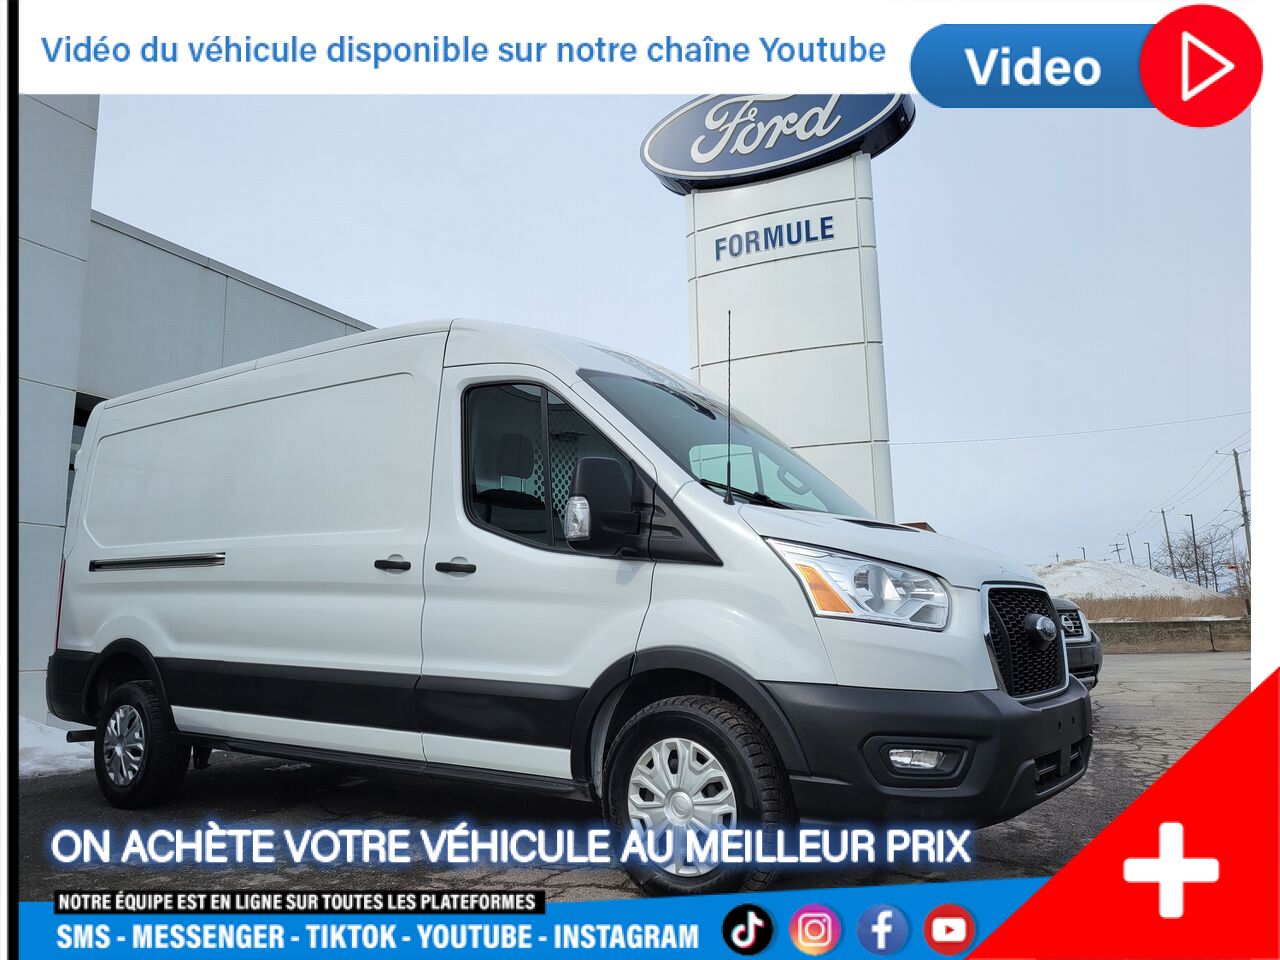 2021 Ford Transit fourgon utilitaire Granby - photo #0